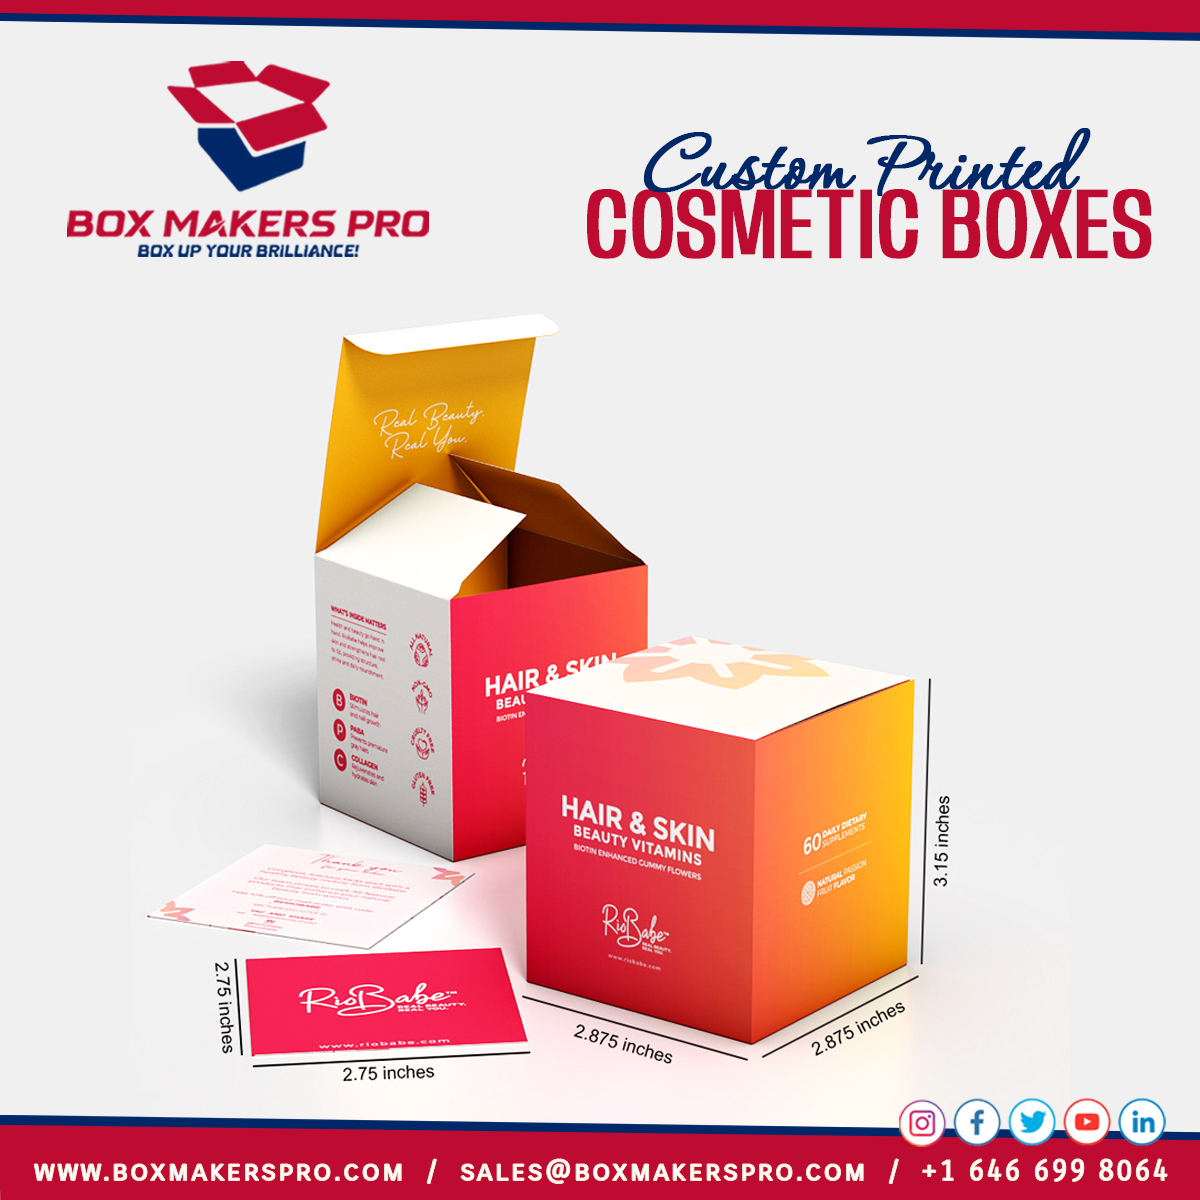 Looking to elevate your #cosmeticbrand to the next level? 🚀 Look no further! Introducing our stunning #CustomPrintedCosmeticBoxes  – the perfect fusion of style and functionality. 💄💼
.
.
#boxmakerspro  #CustomPrintedCosmeticBoxes